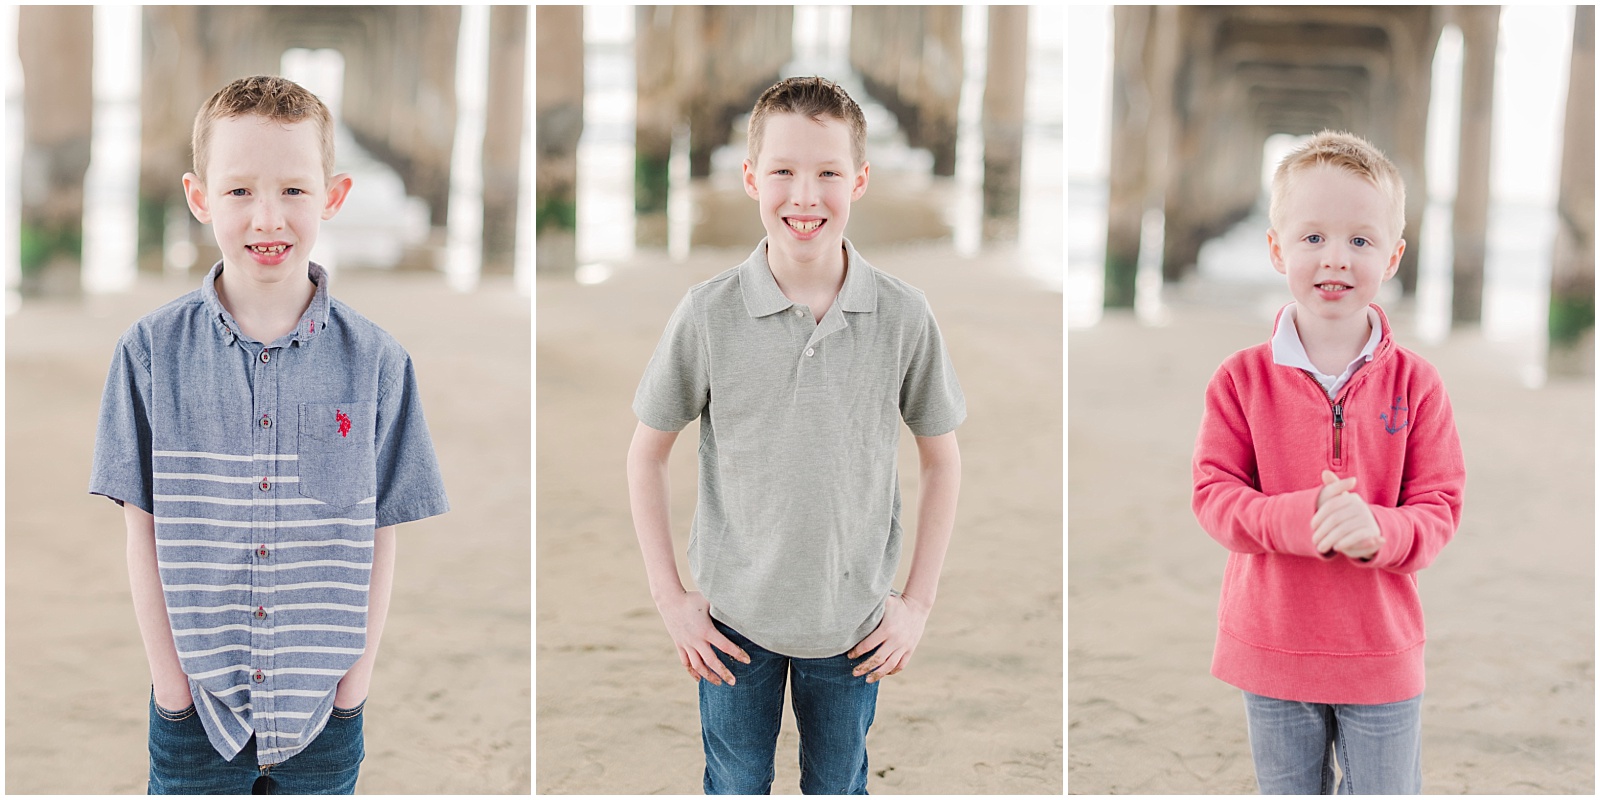 Manhattan Beach Family Session. Photography by Mollie Jane Photography. To see more go to www.molliejanephotography.com